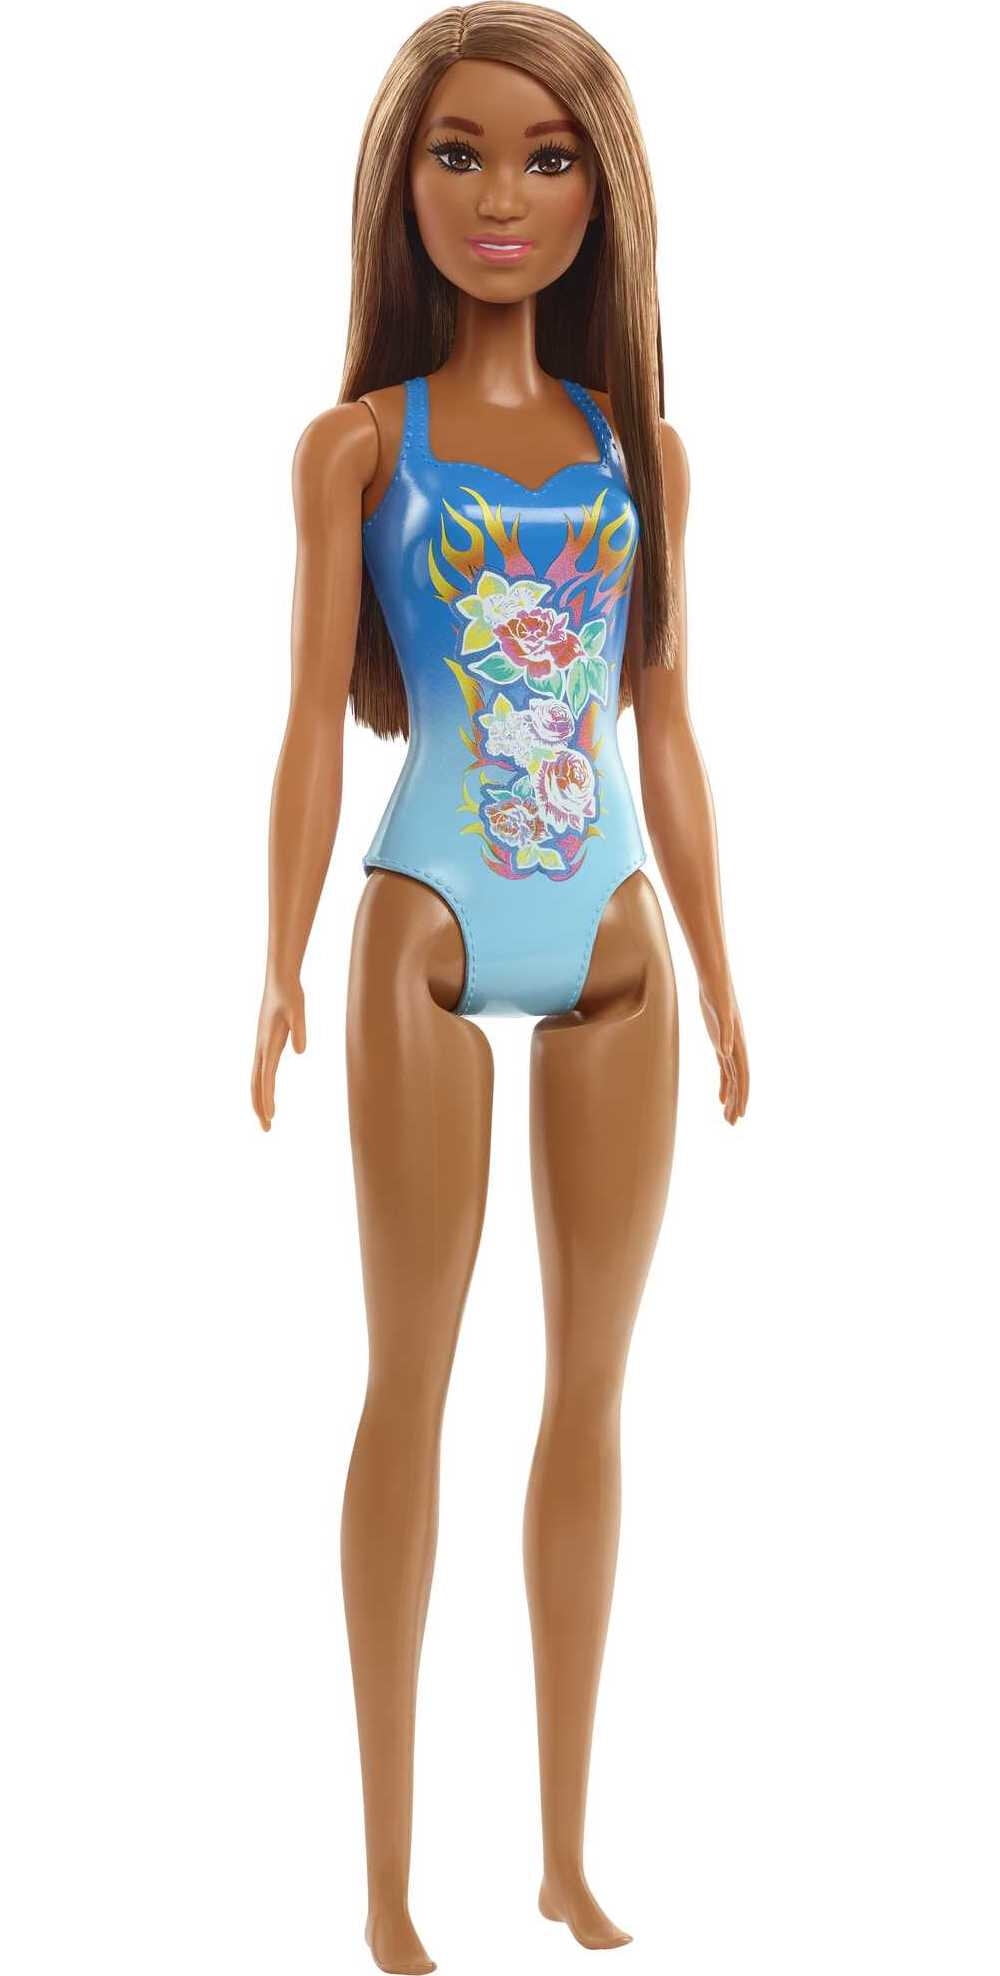 Barbie Beach Doll in Tropical Blue Swimsuit with Straight Brown Hair